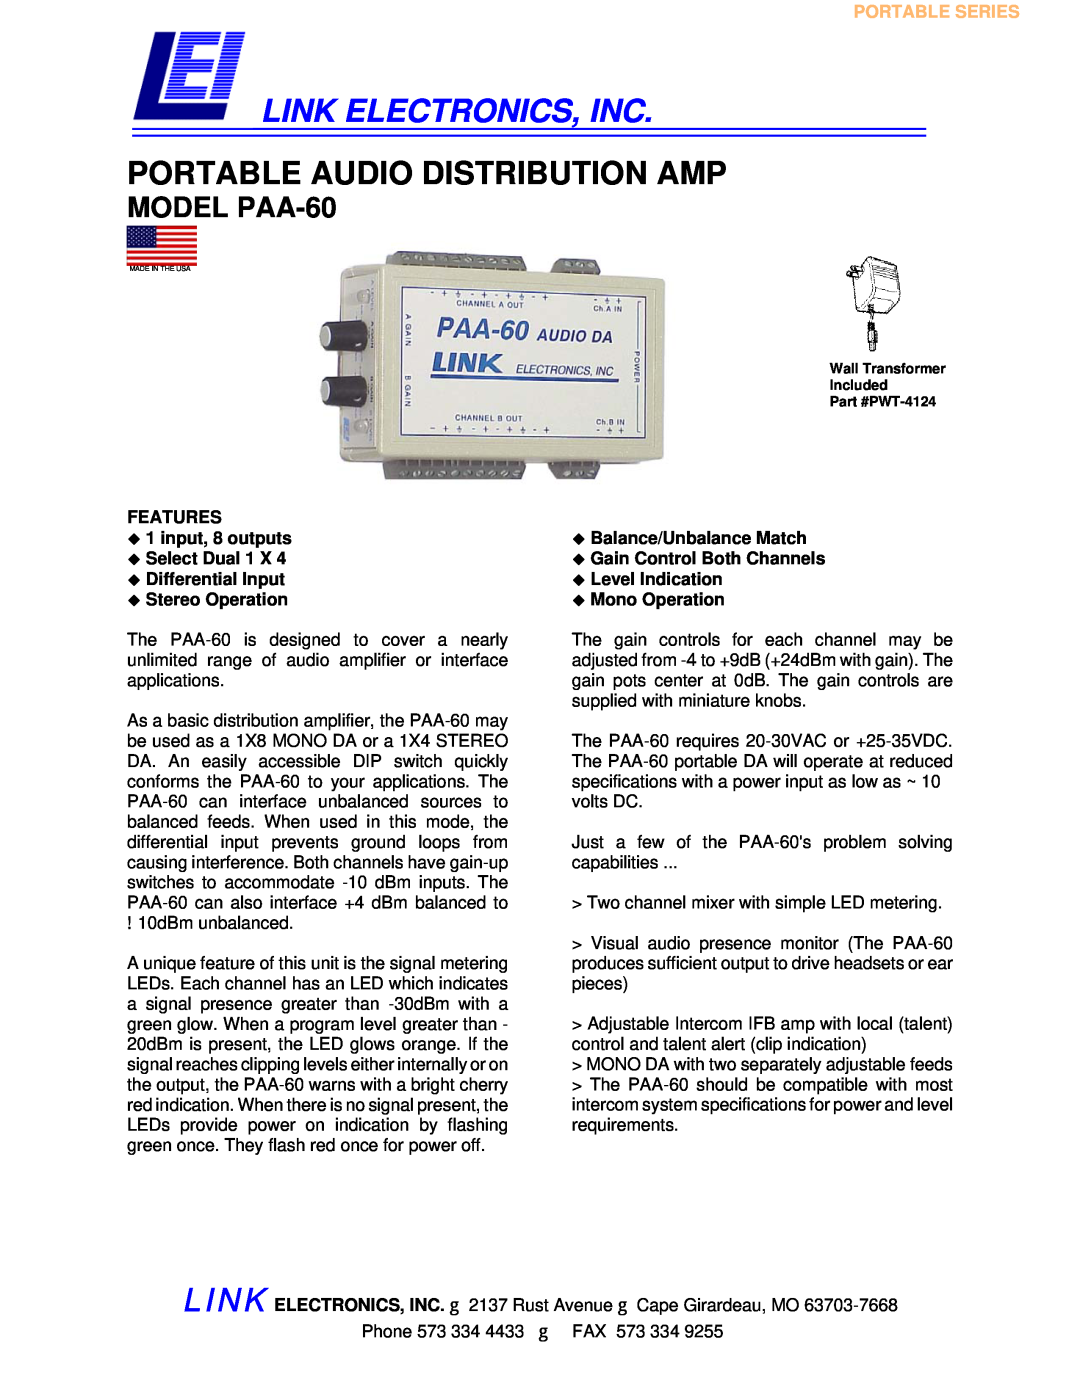 Link electronic PAA-60 specifications FEATURES ‹1 input, 8 outputs ‹Select Dual 1, ‹Differential Input ‹Stereo Operation 